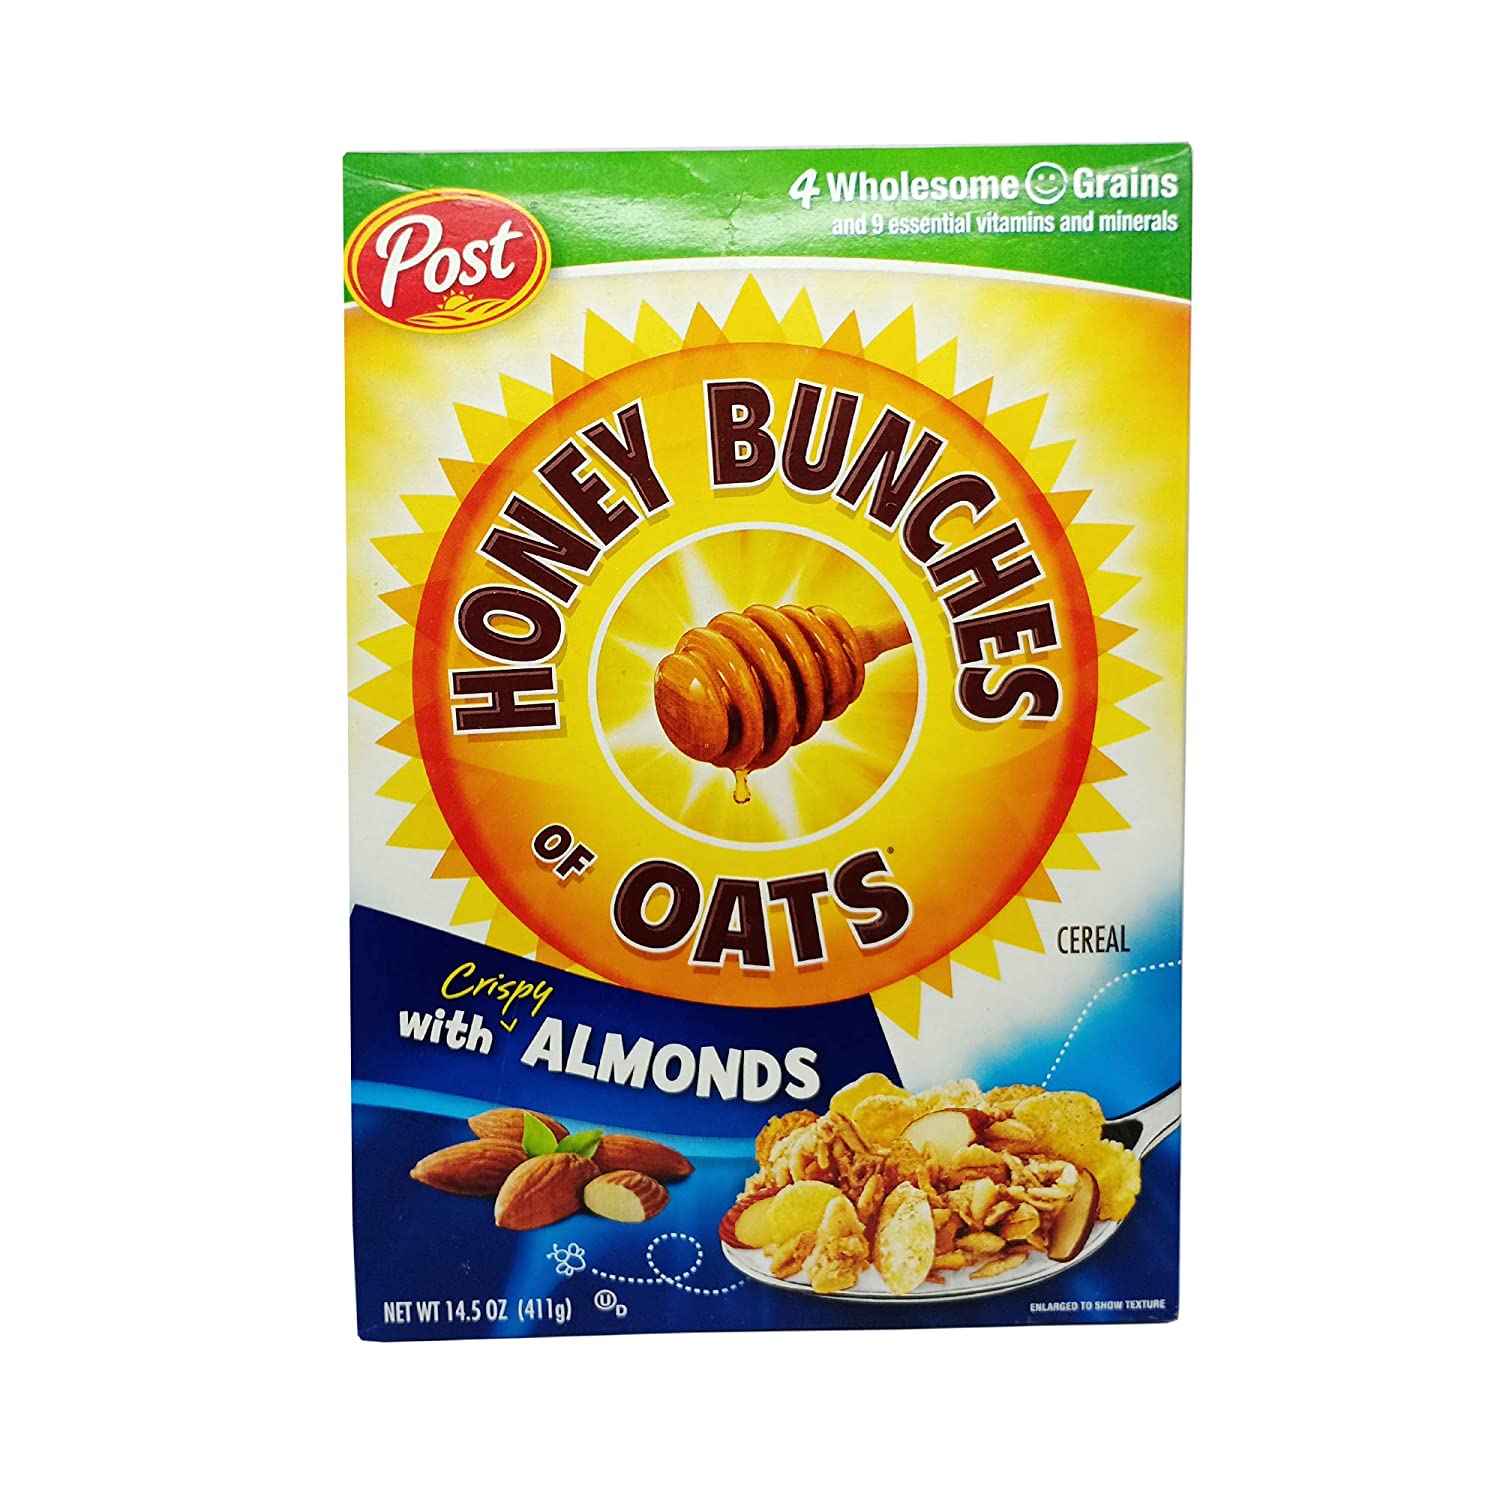 Post Honey Bunches of Oats Almond 411G